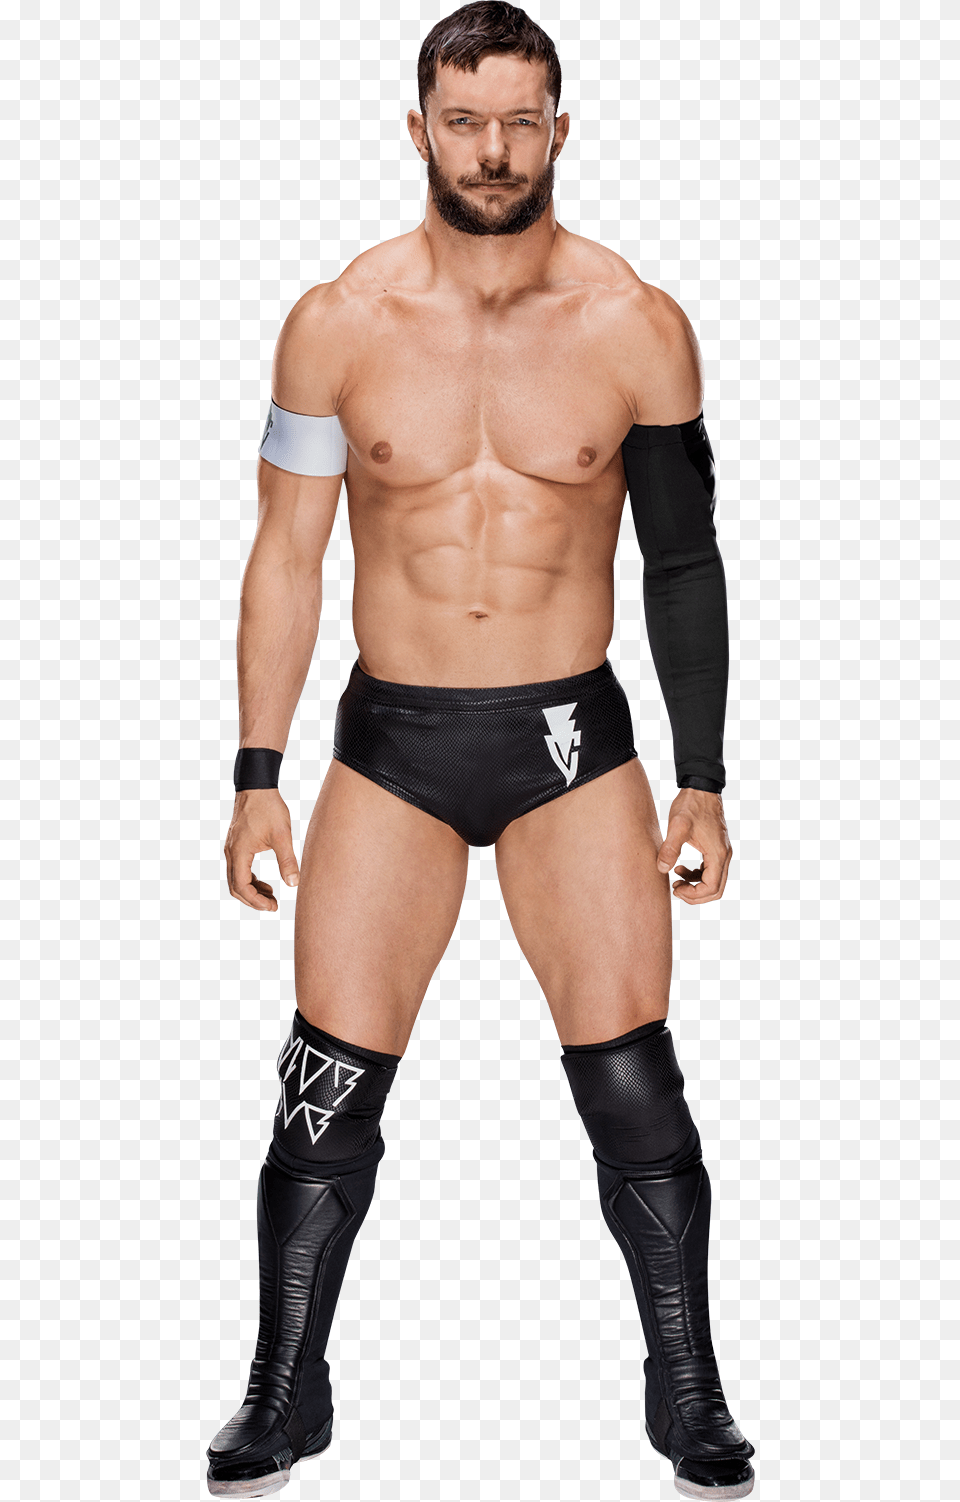 Finn Balor Full New Body, Adult, Male, Man, Person Png